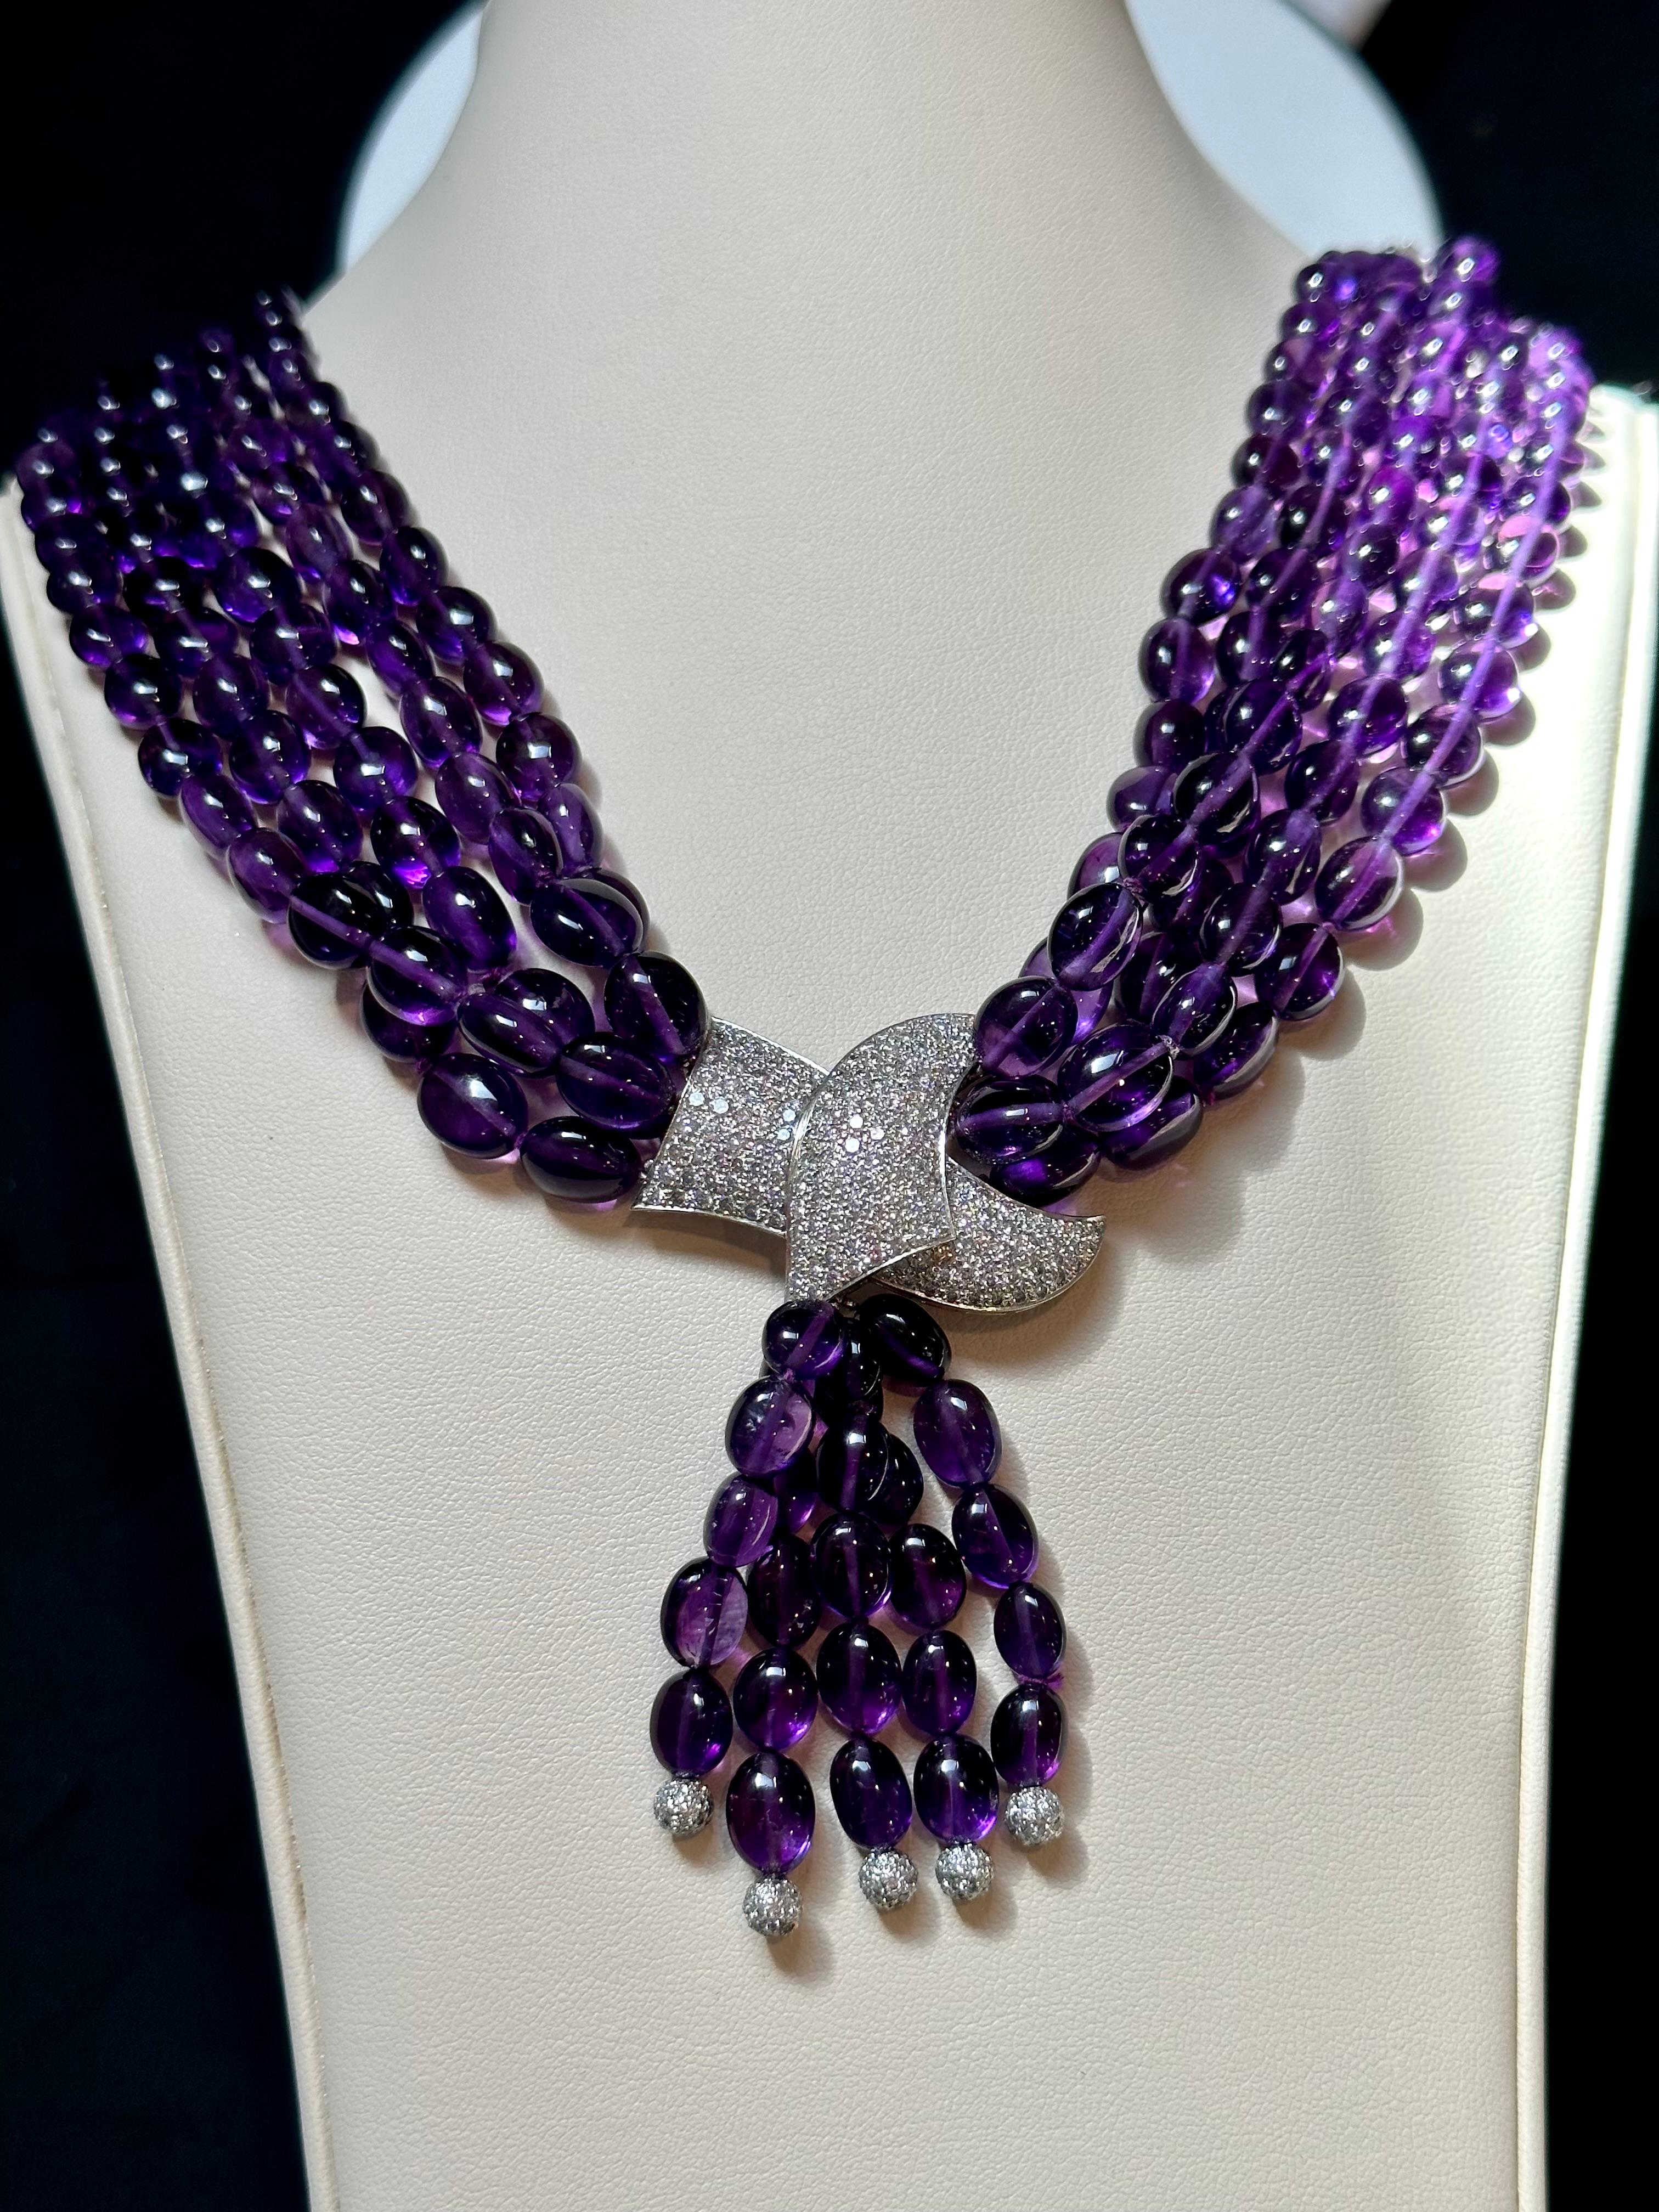 700 Ct Natural Amethyst Multi Layer Bead Necklace in Platinum with 9 Ct Diamonds For Sale 13